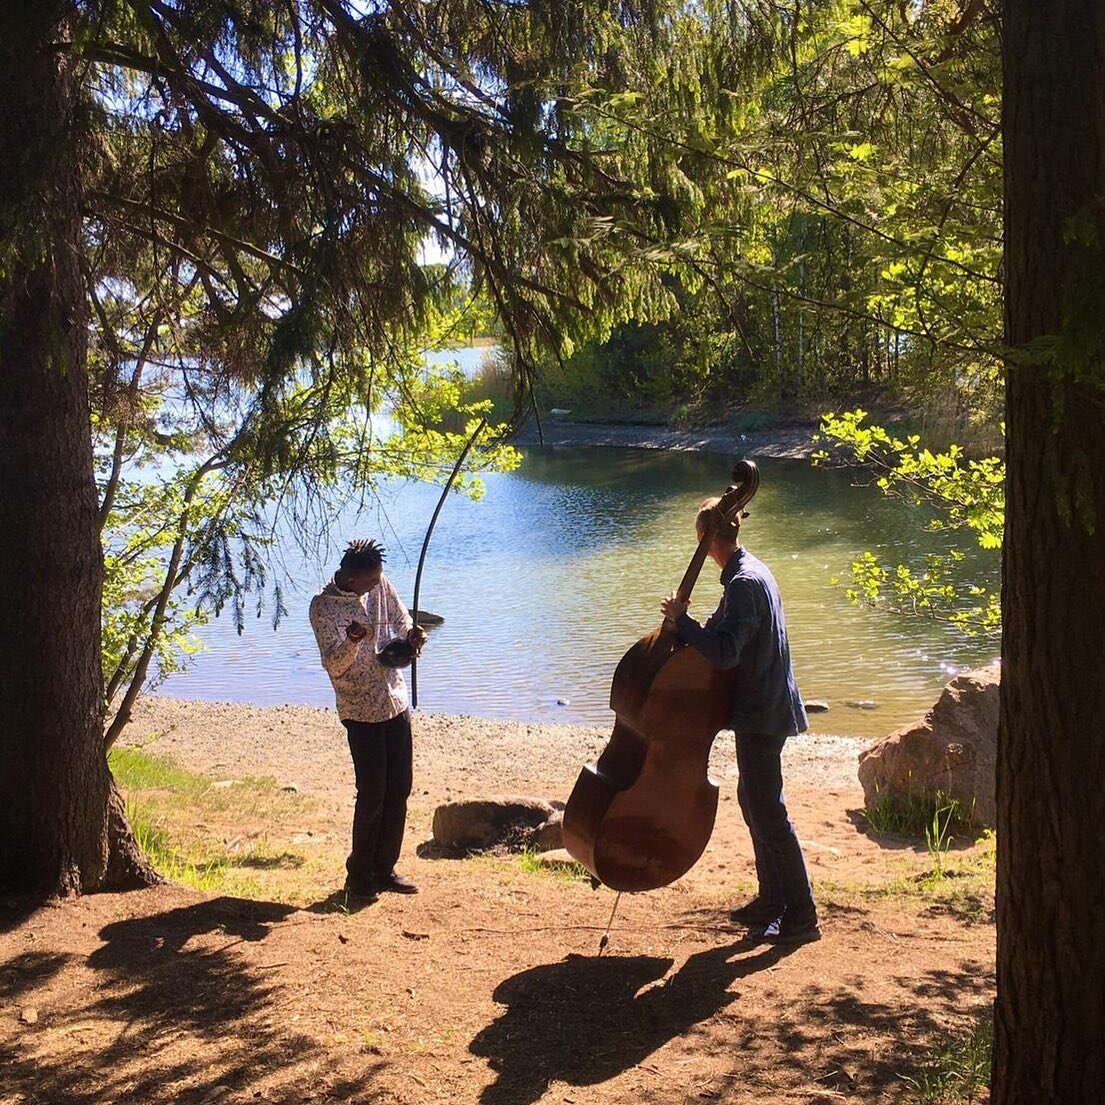 Recording outdoors in the Finnish nature with wonderful Adriano Adewale and Ville Tanttu. Photo by Ville Tanttu.